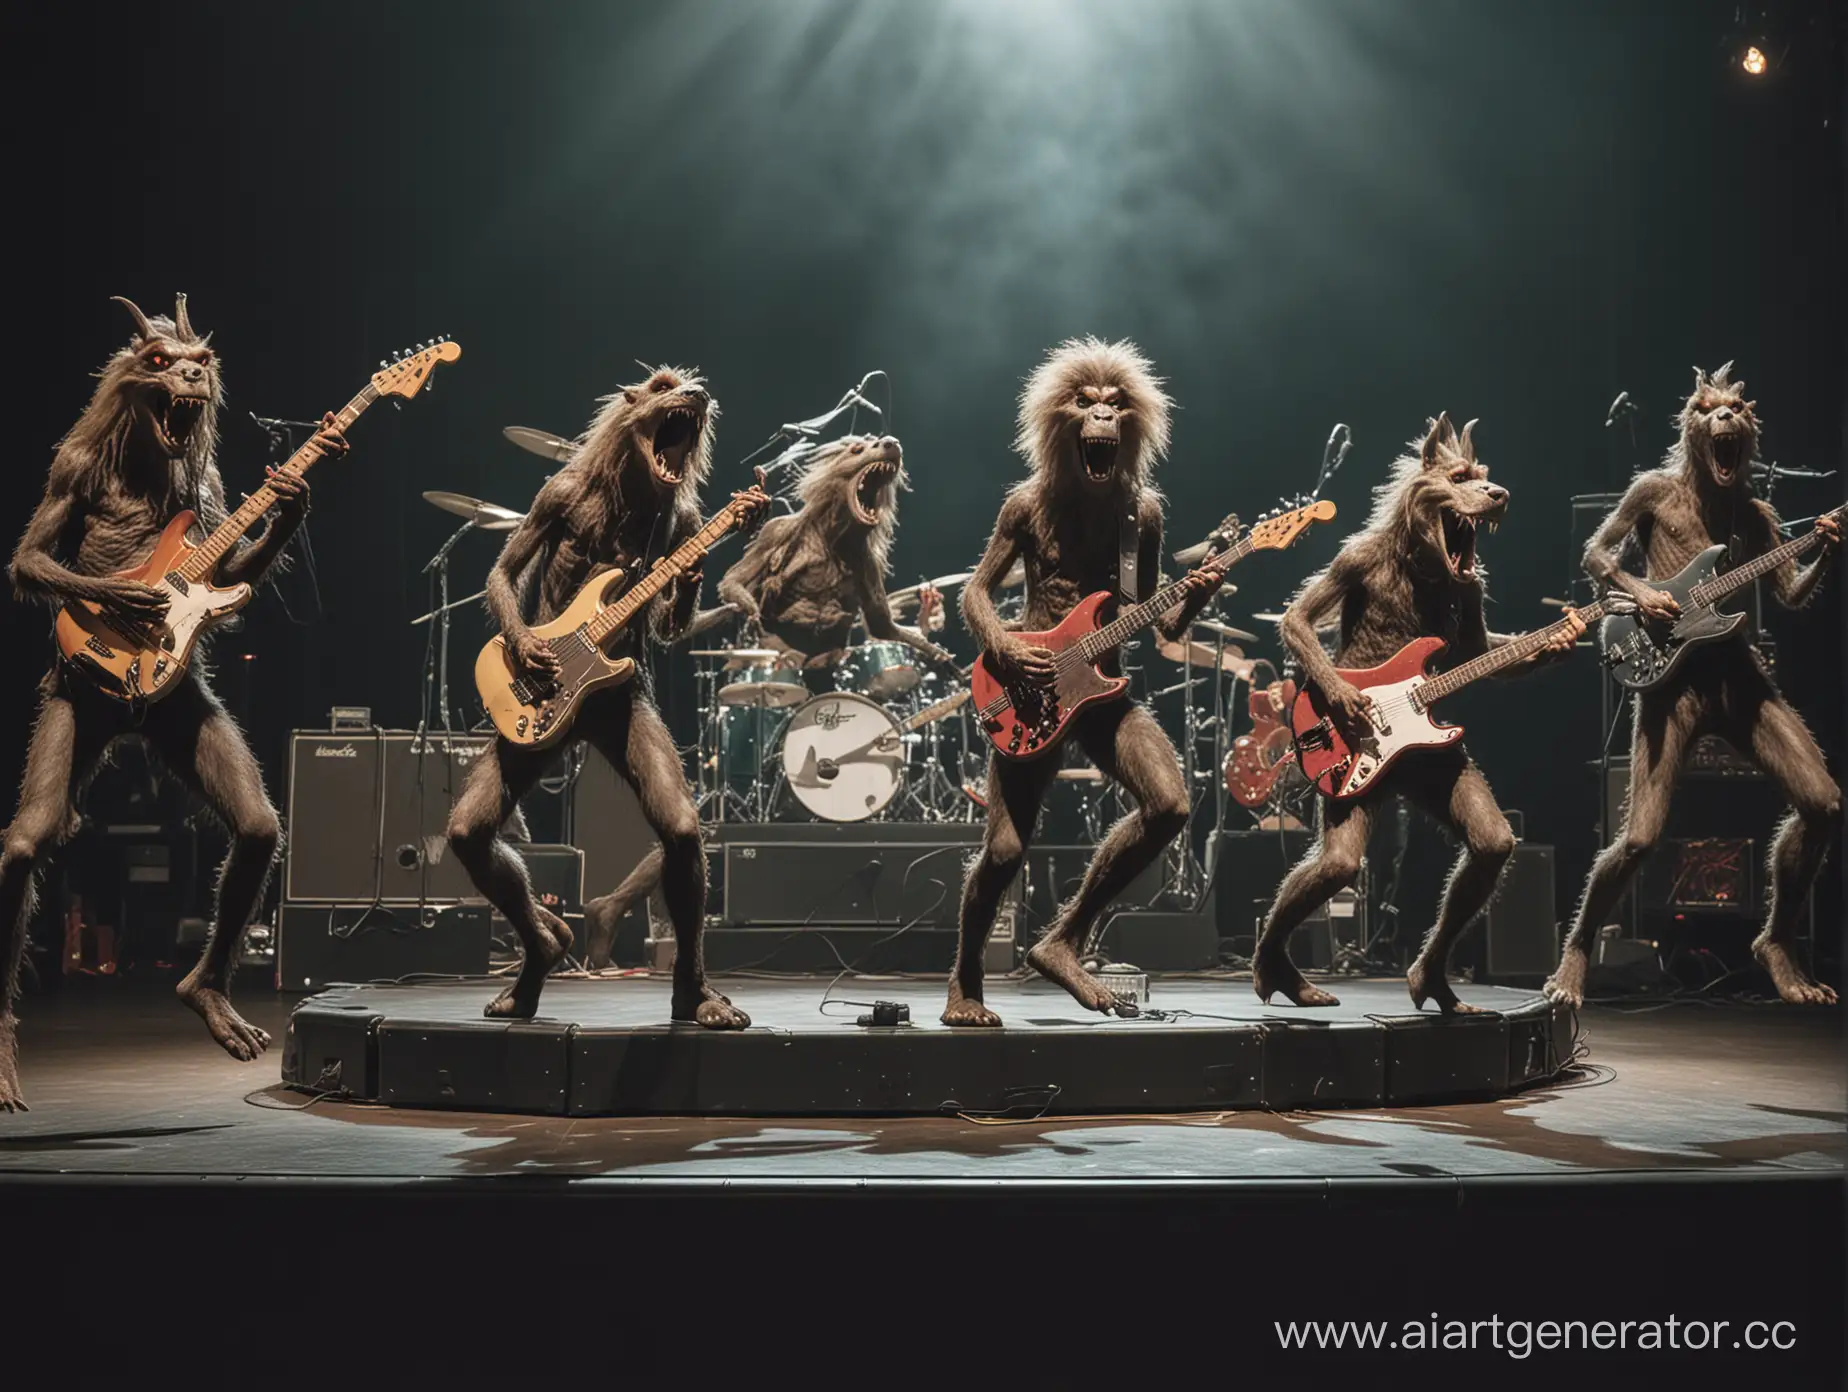 Energetic-Creatures-Rocking-Out-with-Electric-Guitars-on-Stage